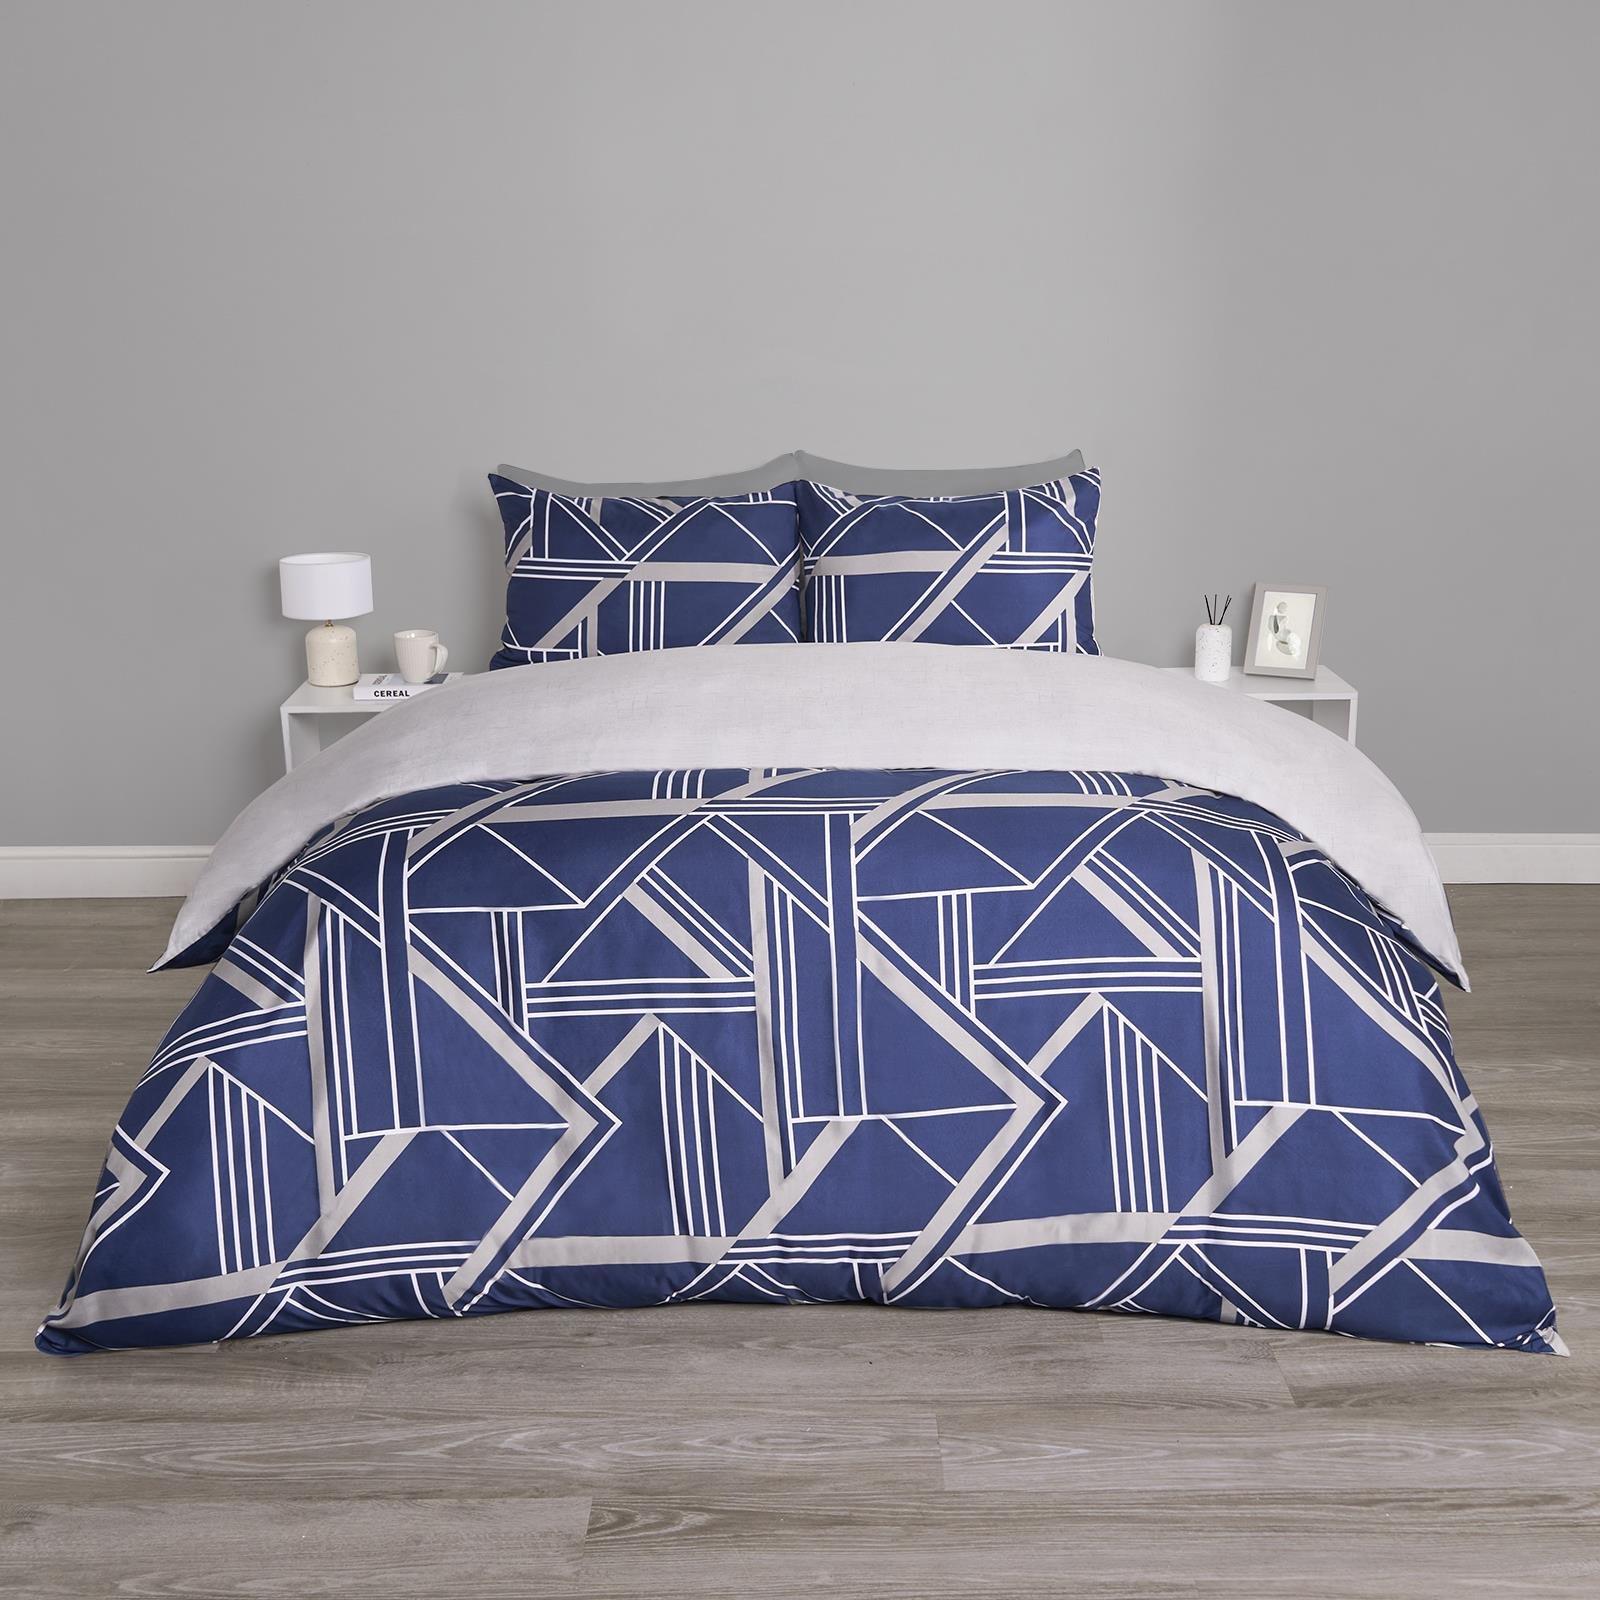 2 Pack Grid Duvet Cover Set with Pillowcases Reversible Quilt